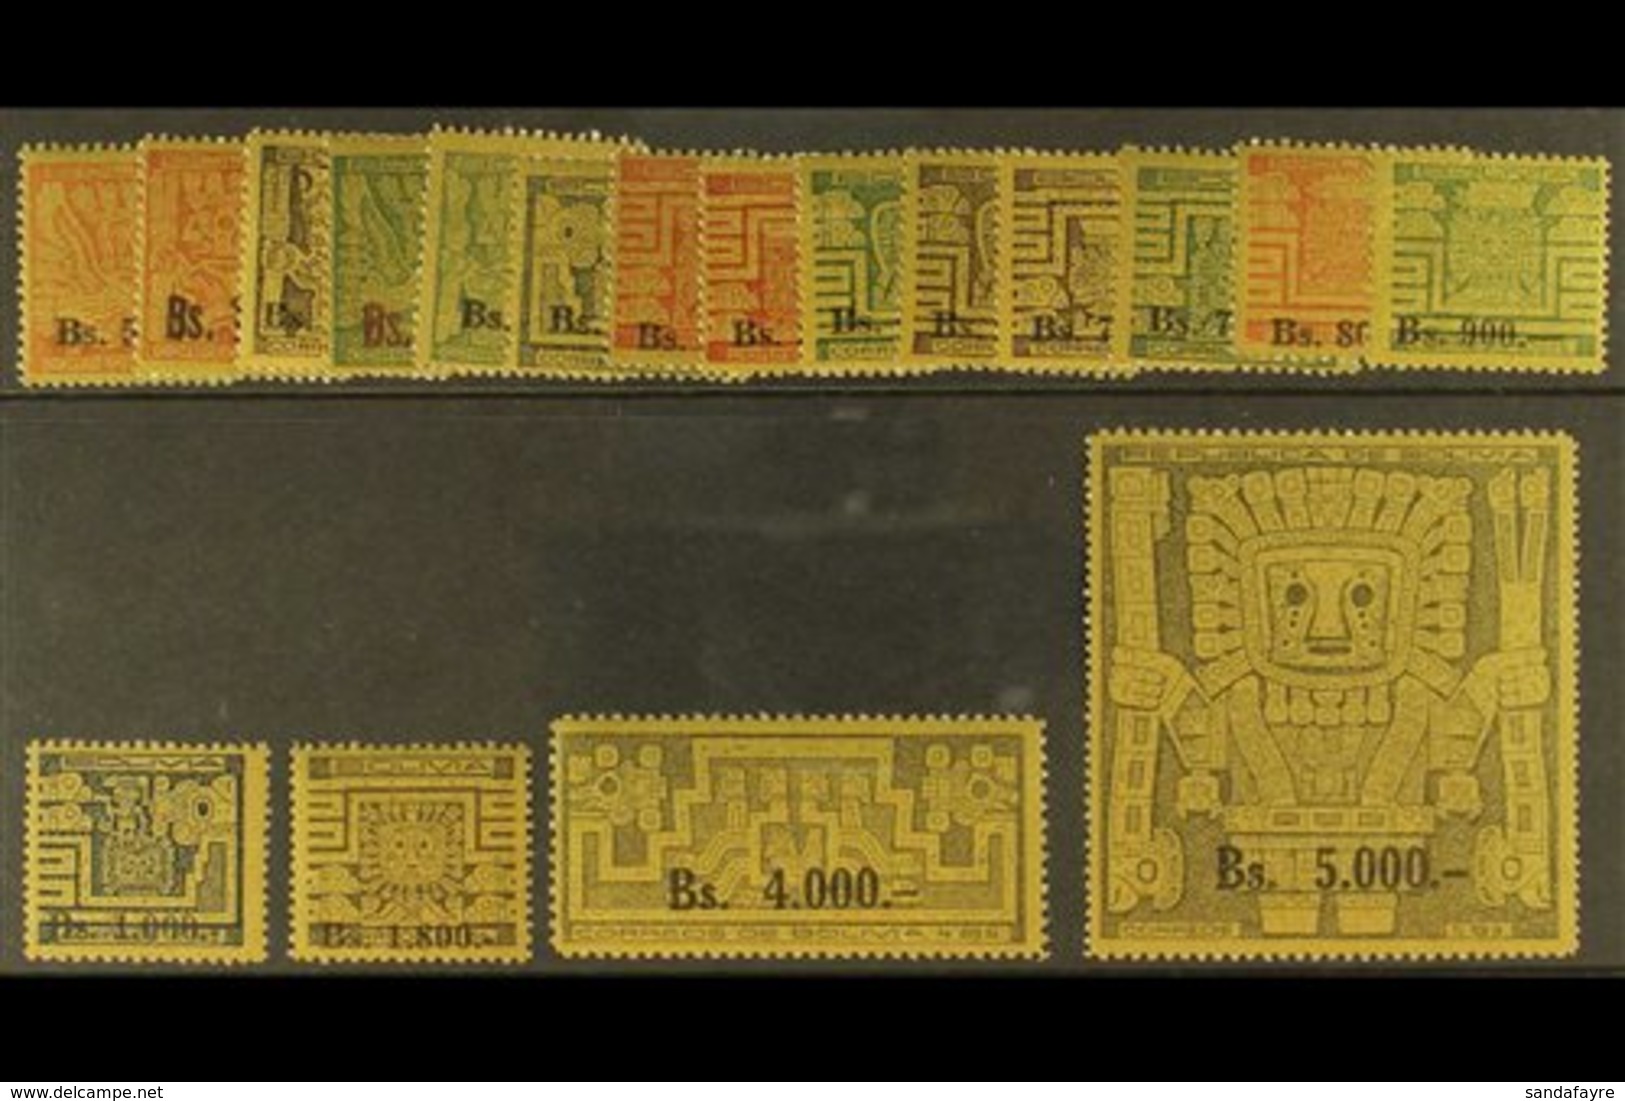 \Y 1960\Y Surcharges Complete Set (Scott 433/50, SG 702/19), Never Hinged Mint, Fresh. (18 Stamps) For More Images, Plea - Bolivia